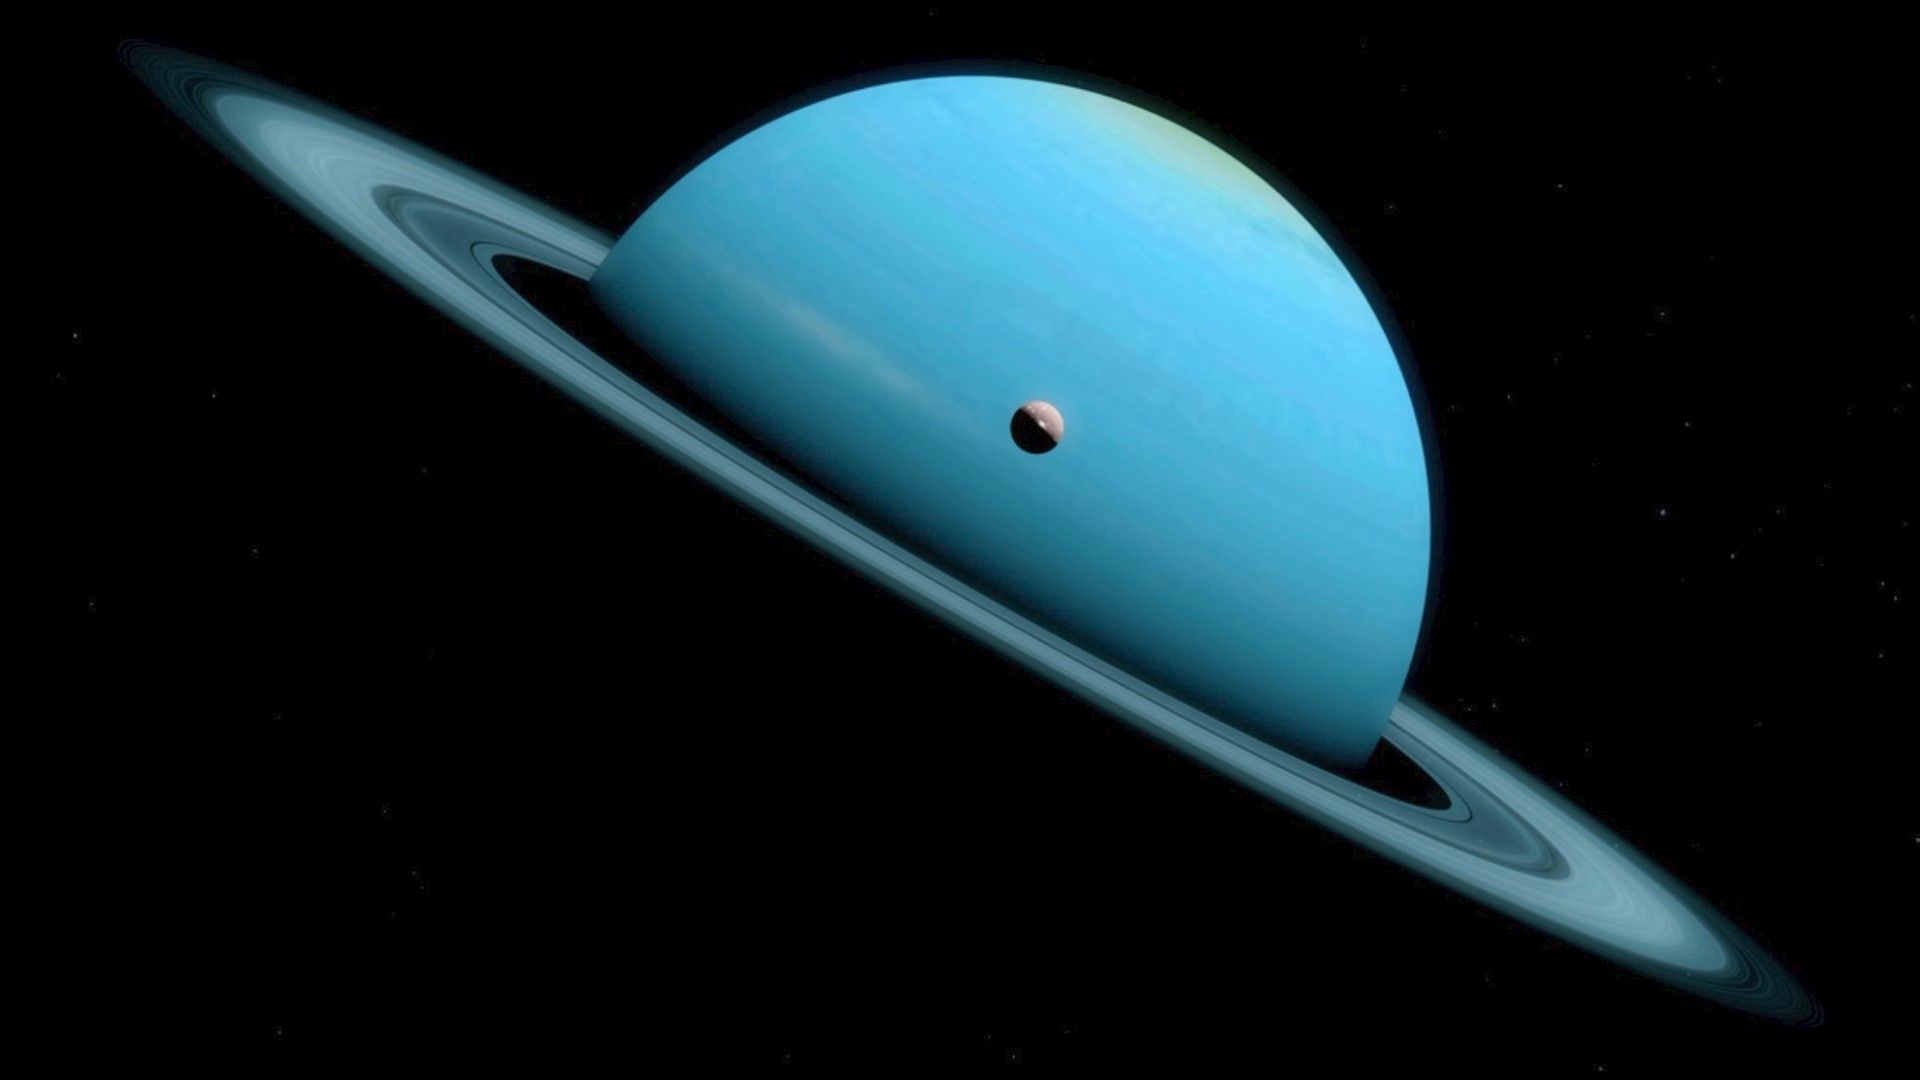 Uranus moons may have water beneath the surface